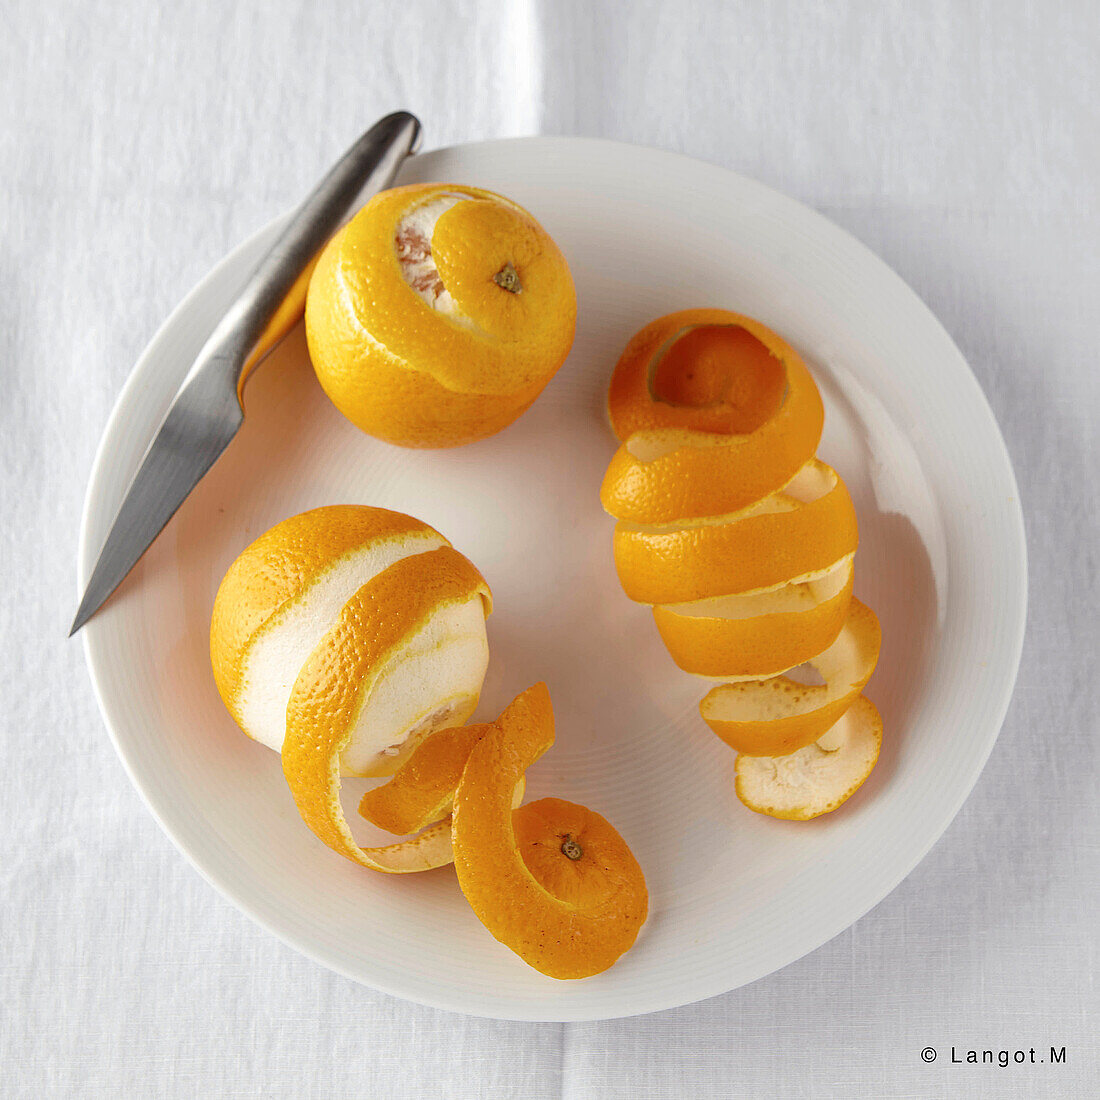 Peeling an orange making a spiral with the rind